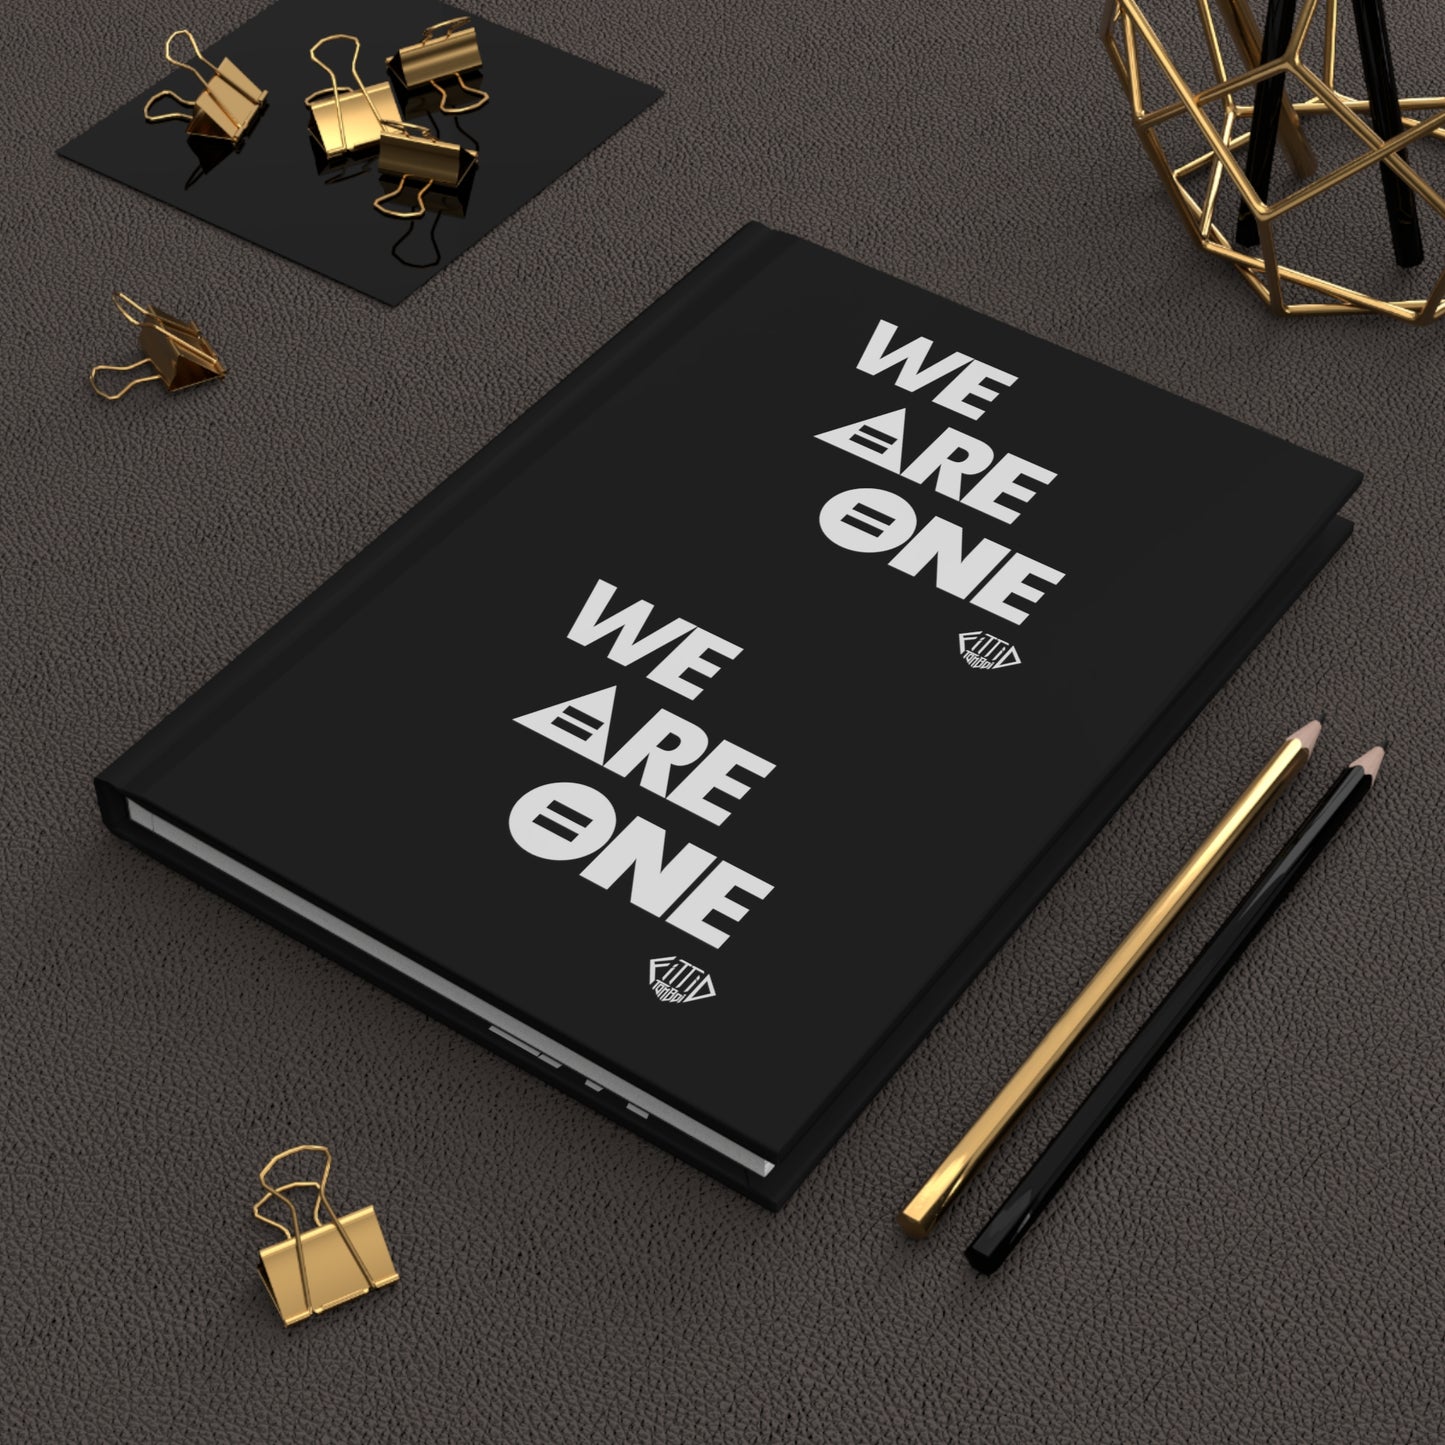 WE ARE ONE Journal Hardcover - Black